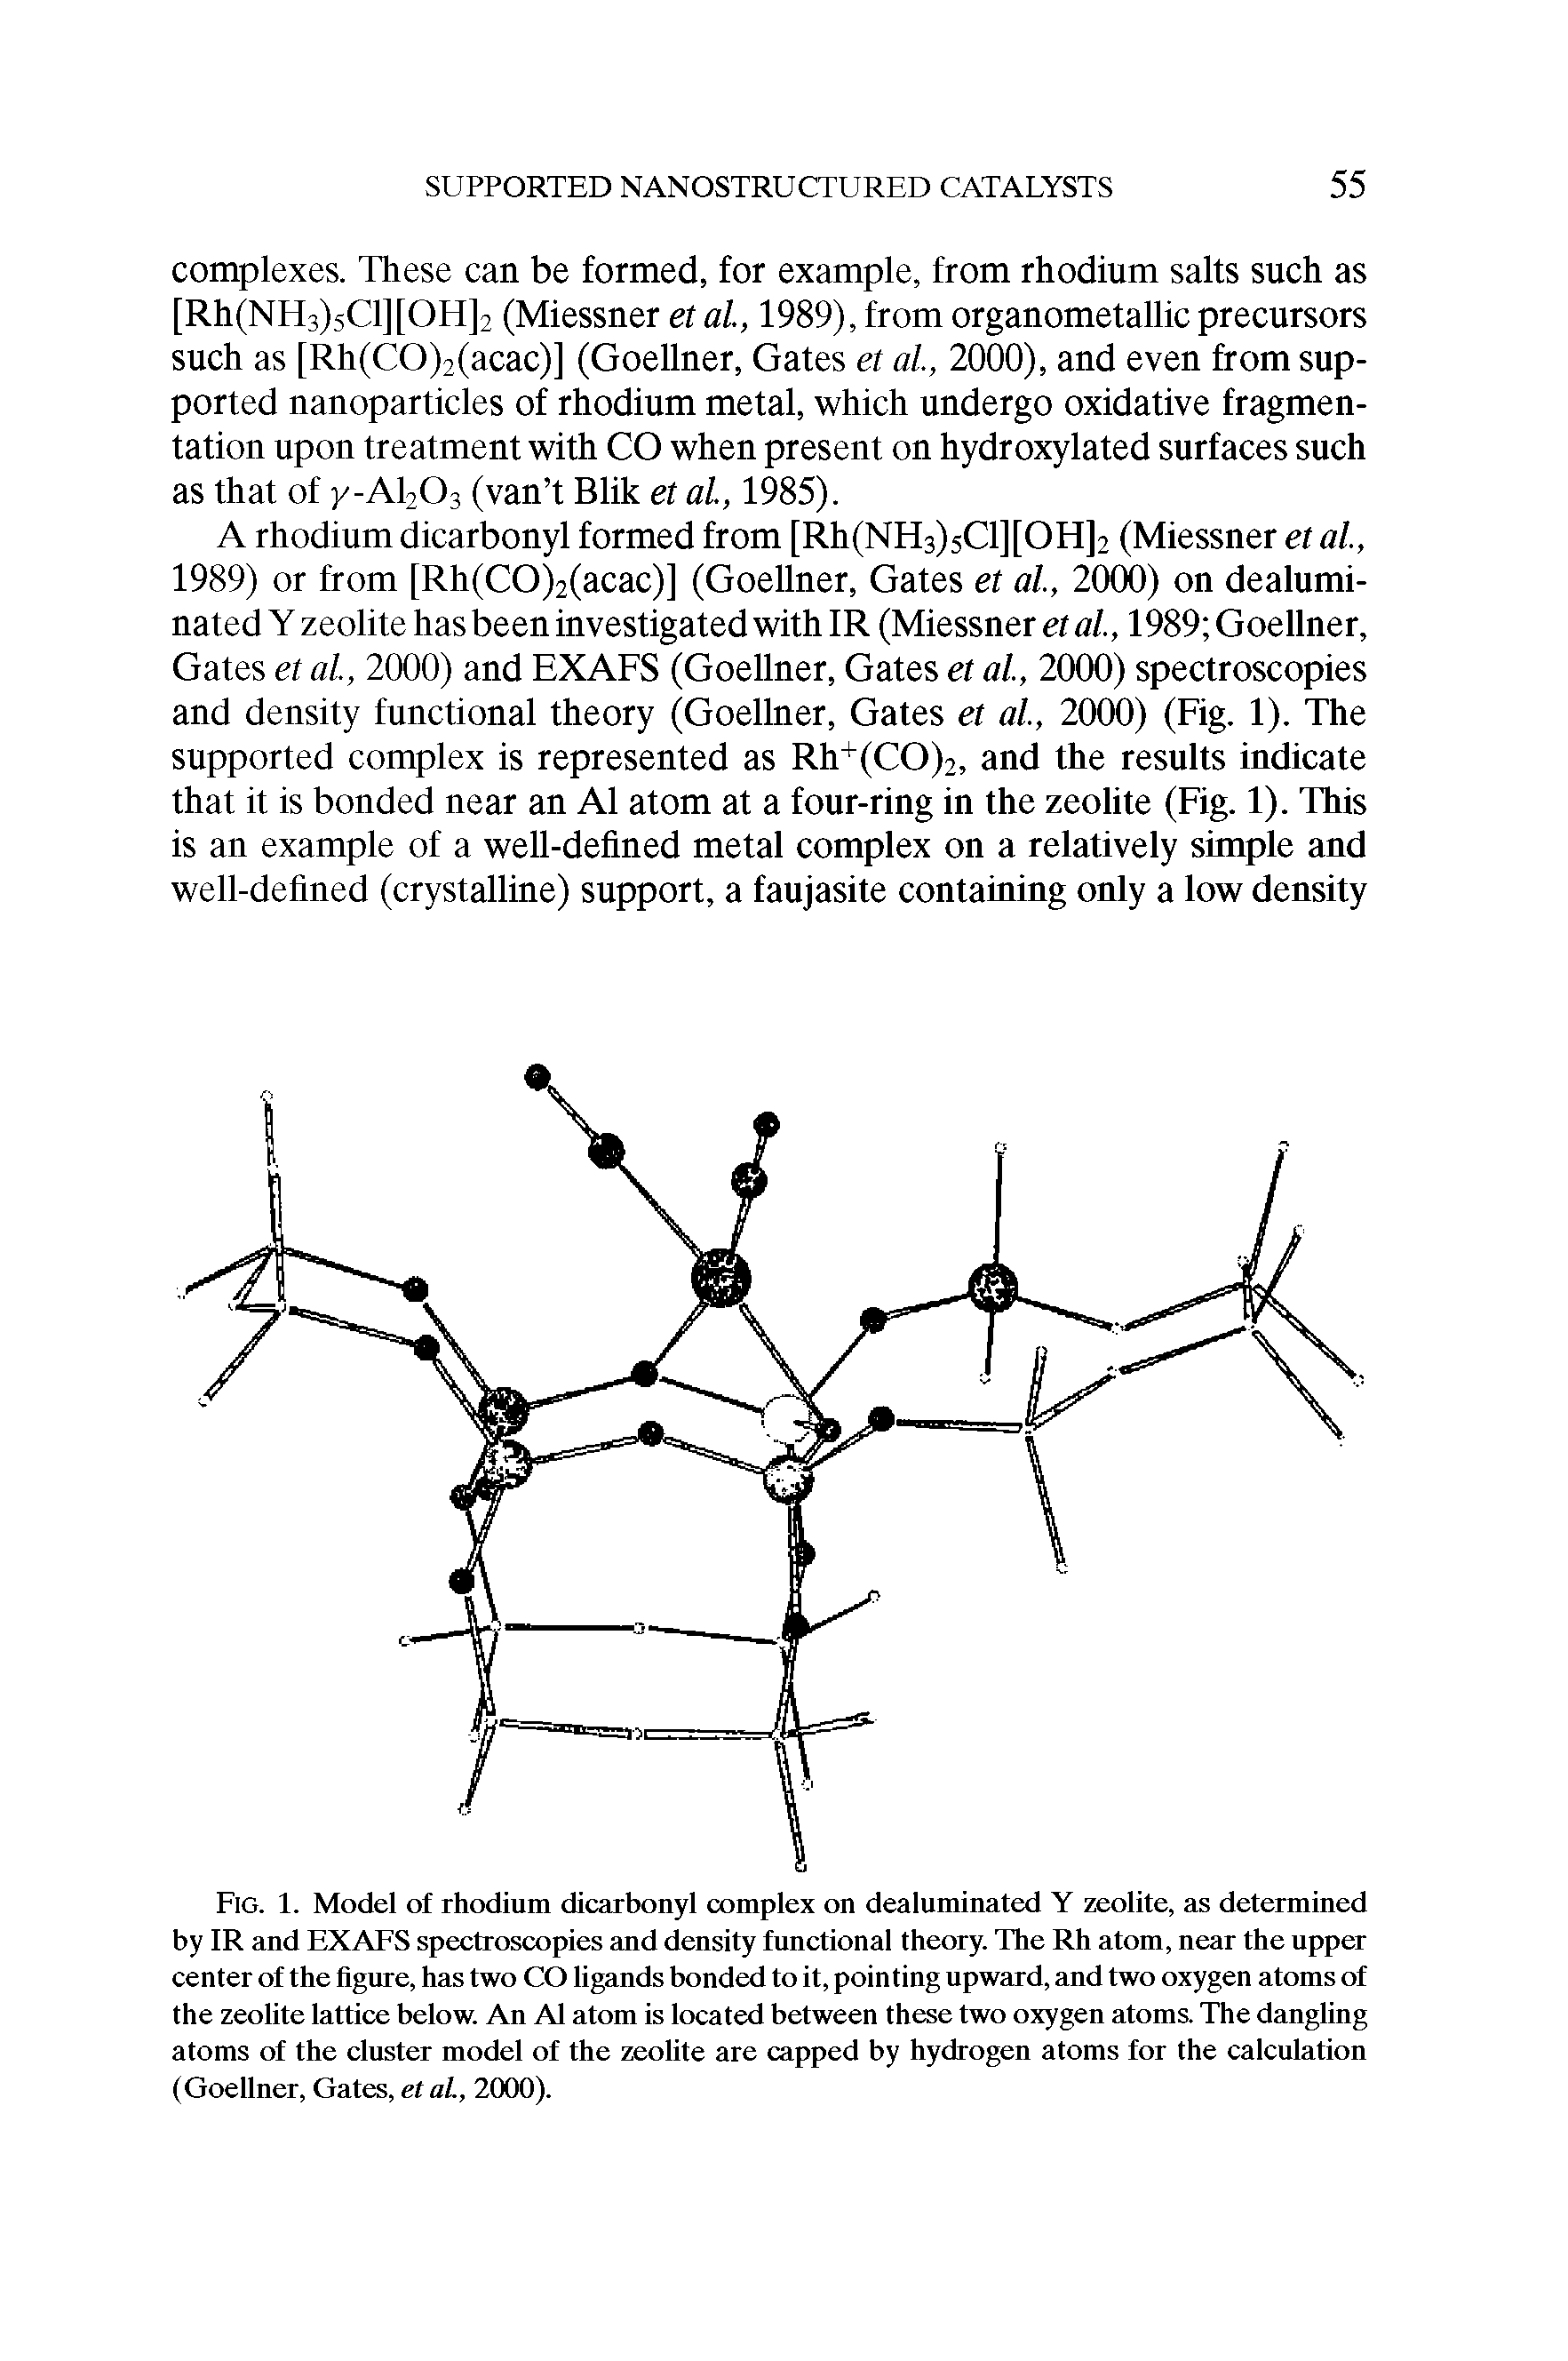 Fig. 1. Model of rhodium dicarbonyl complex on dealuminated Y zeolite, as determined by IR and EXAFS spectroscopies and density functional theory. The Rh atom, near the upper center of the figure, has two CO ligands bonded to it, pointing upward, and two oxygen atoms of the zeolite lattice below. An Al atom is located between these two oxygen atoms. The dangling atoms of the cluster model of the zeolite are capped by hydrogen atoms for the calculation (Goellner, Gates, etal., 2000).